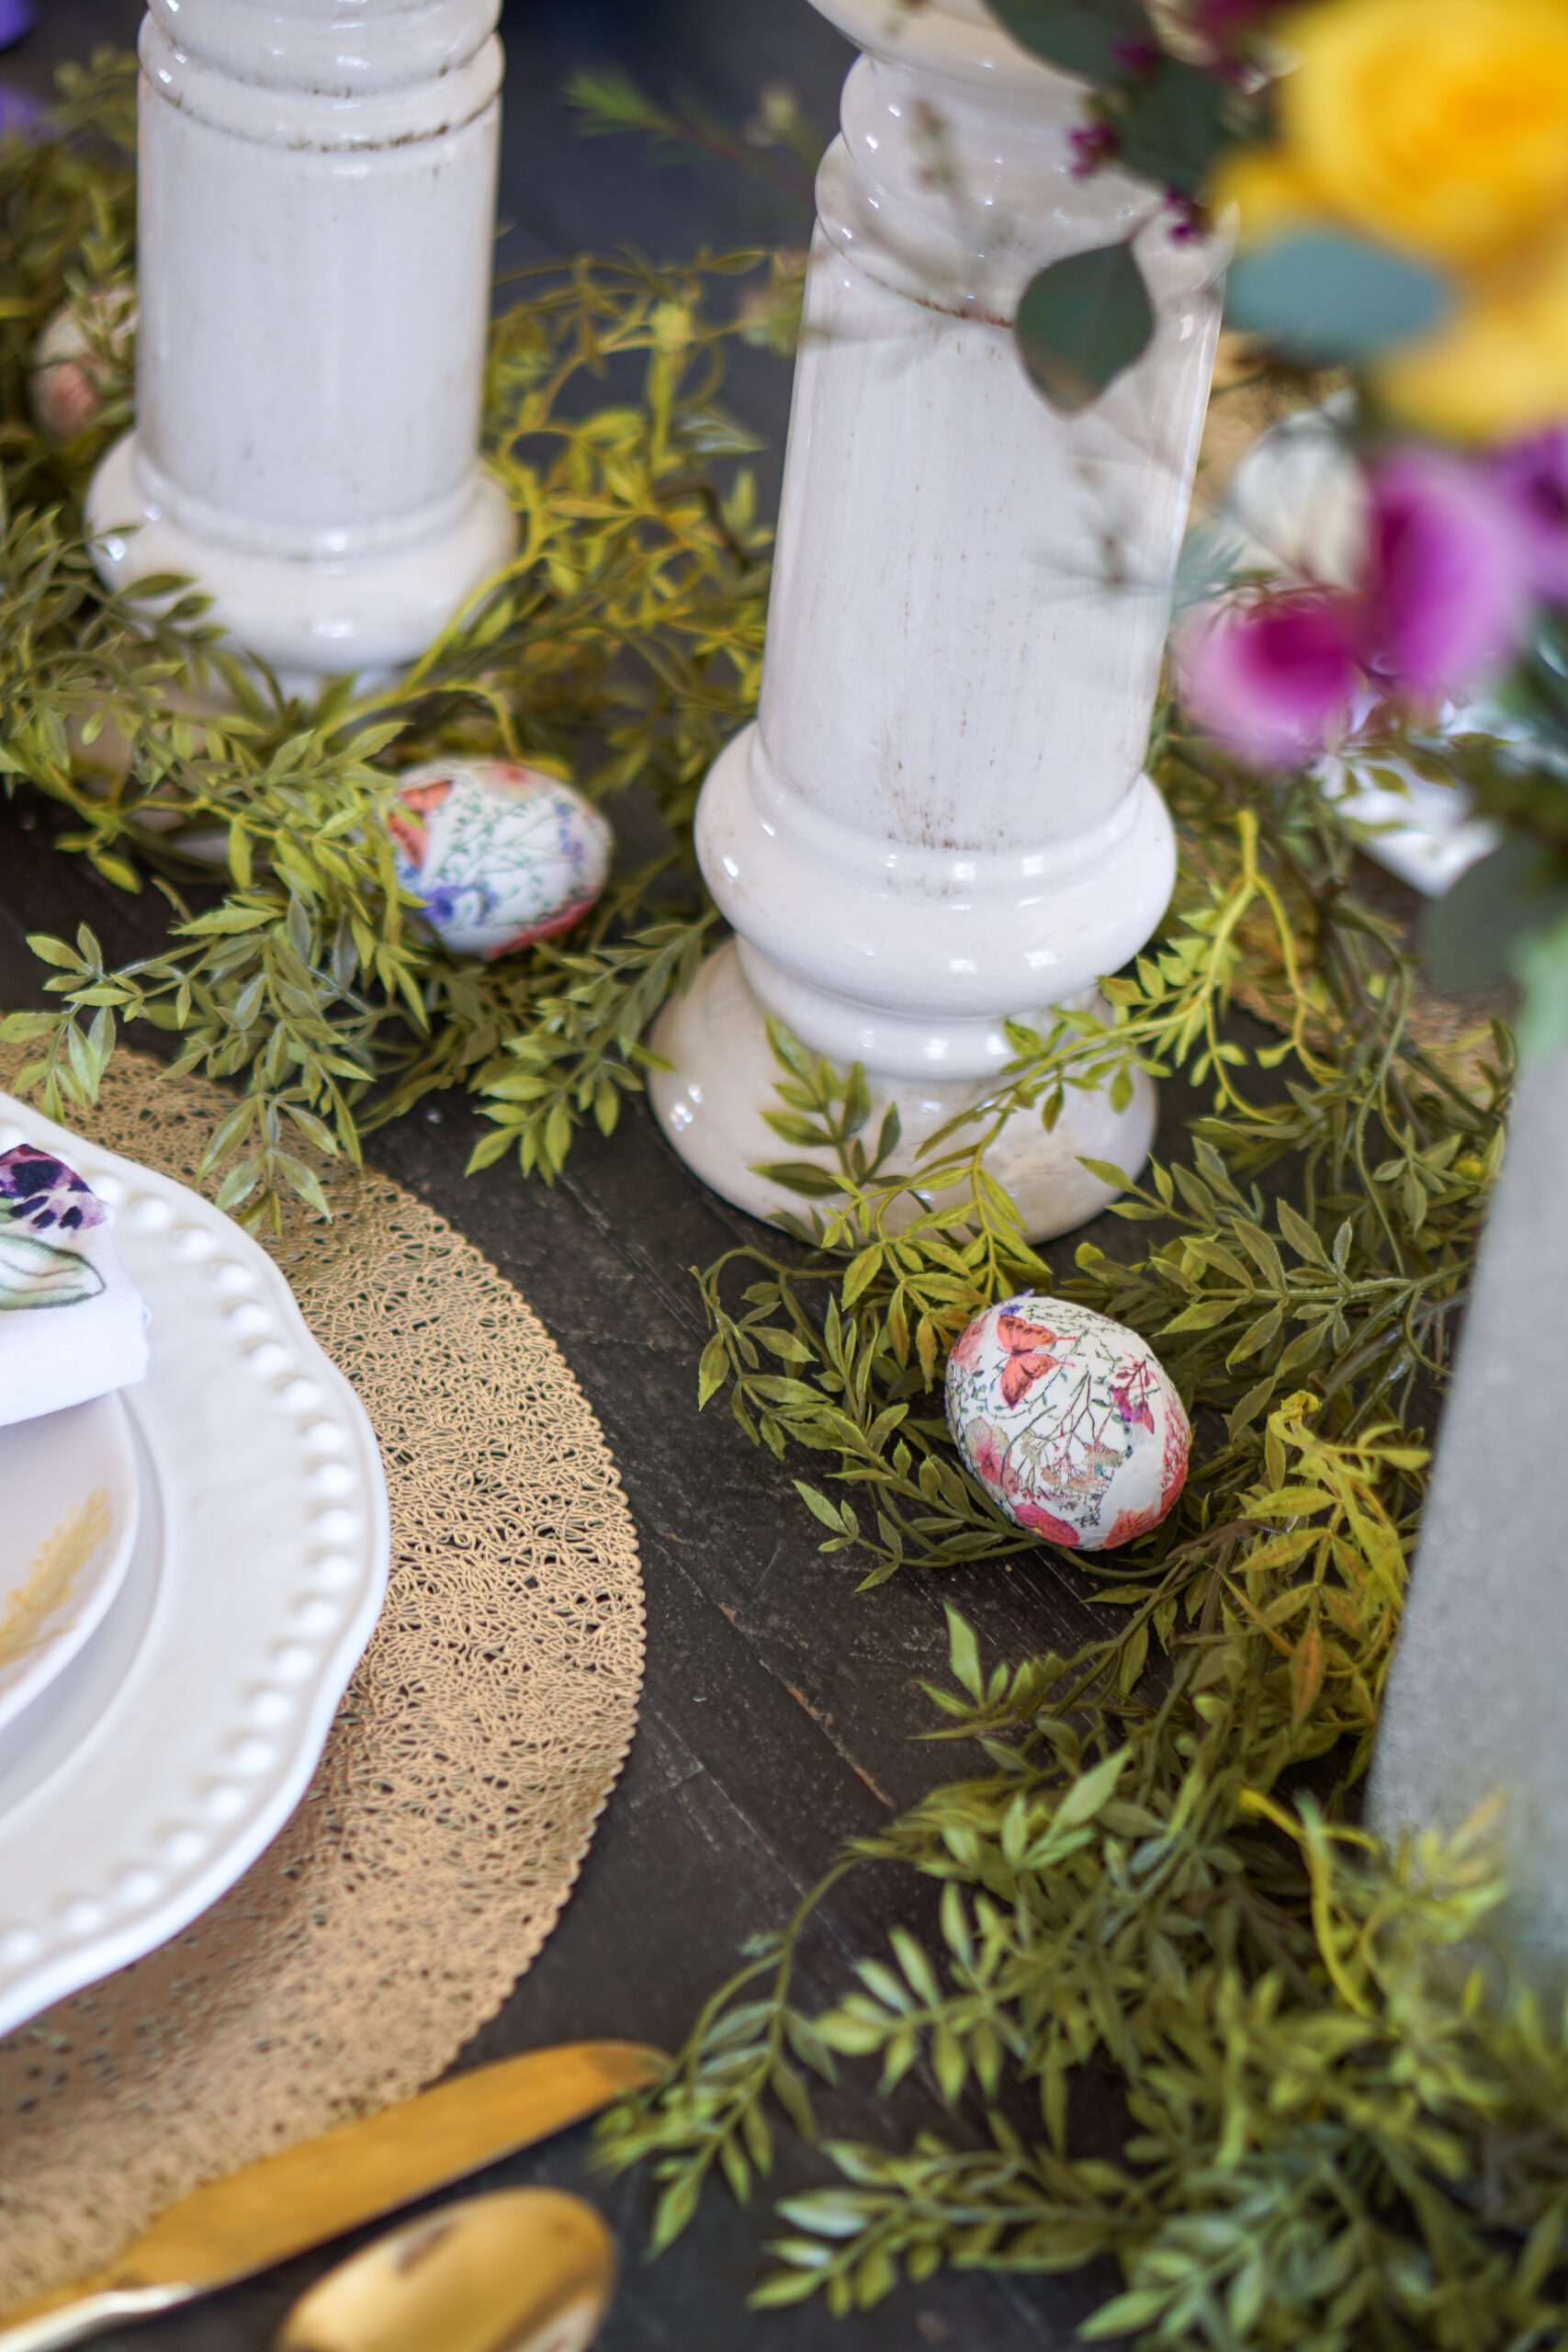 Easy and Effortless Ways to Elevate Your Easter Celebrations at Home